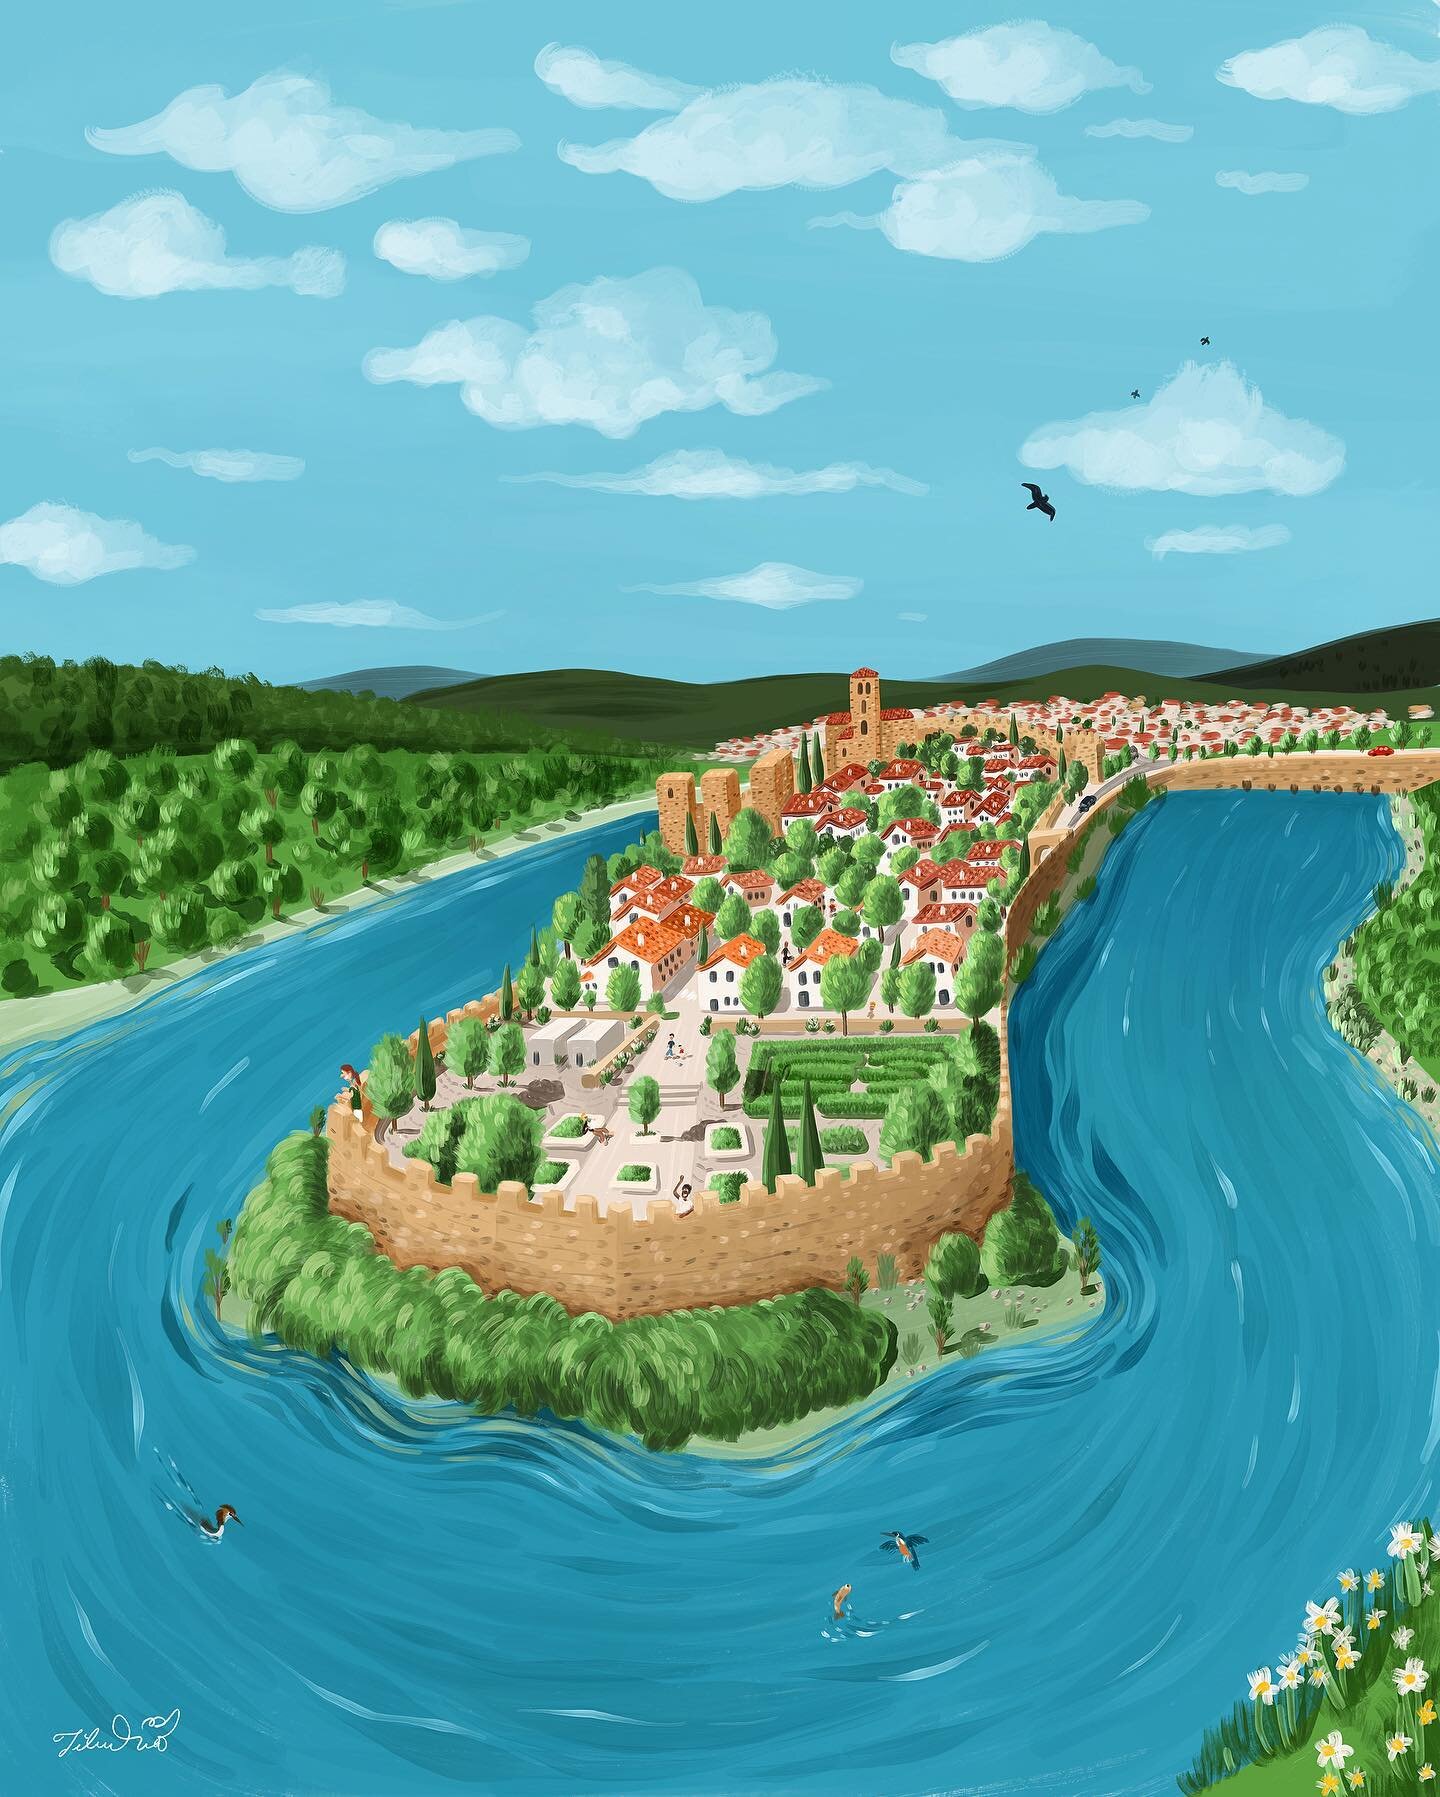 Buitrago del Lozoya, a well preserved fortified 11th Century village just one our away from Madrid. Illustration from the campaign &ldquo;Villas de Madrid&rdquo; I&rsquo;ve just finished for @turismocmadrid and @culturacmadrid.
​
​A little bit hidden